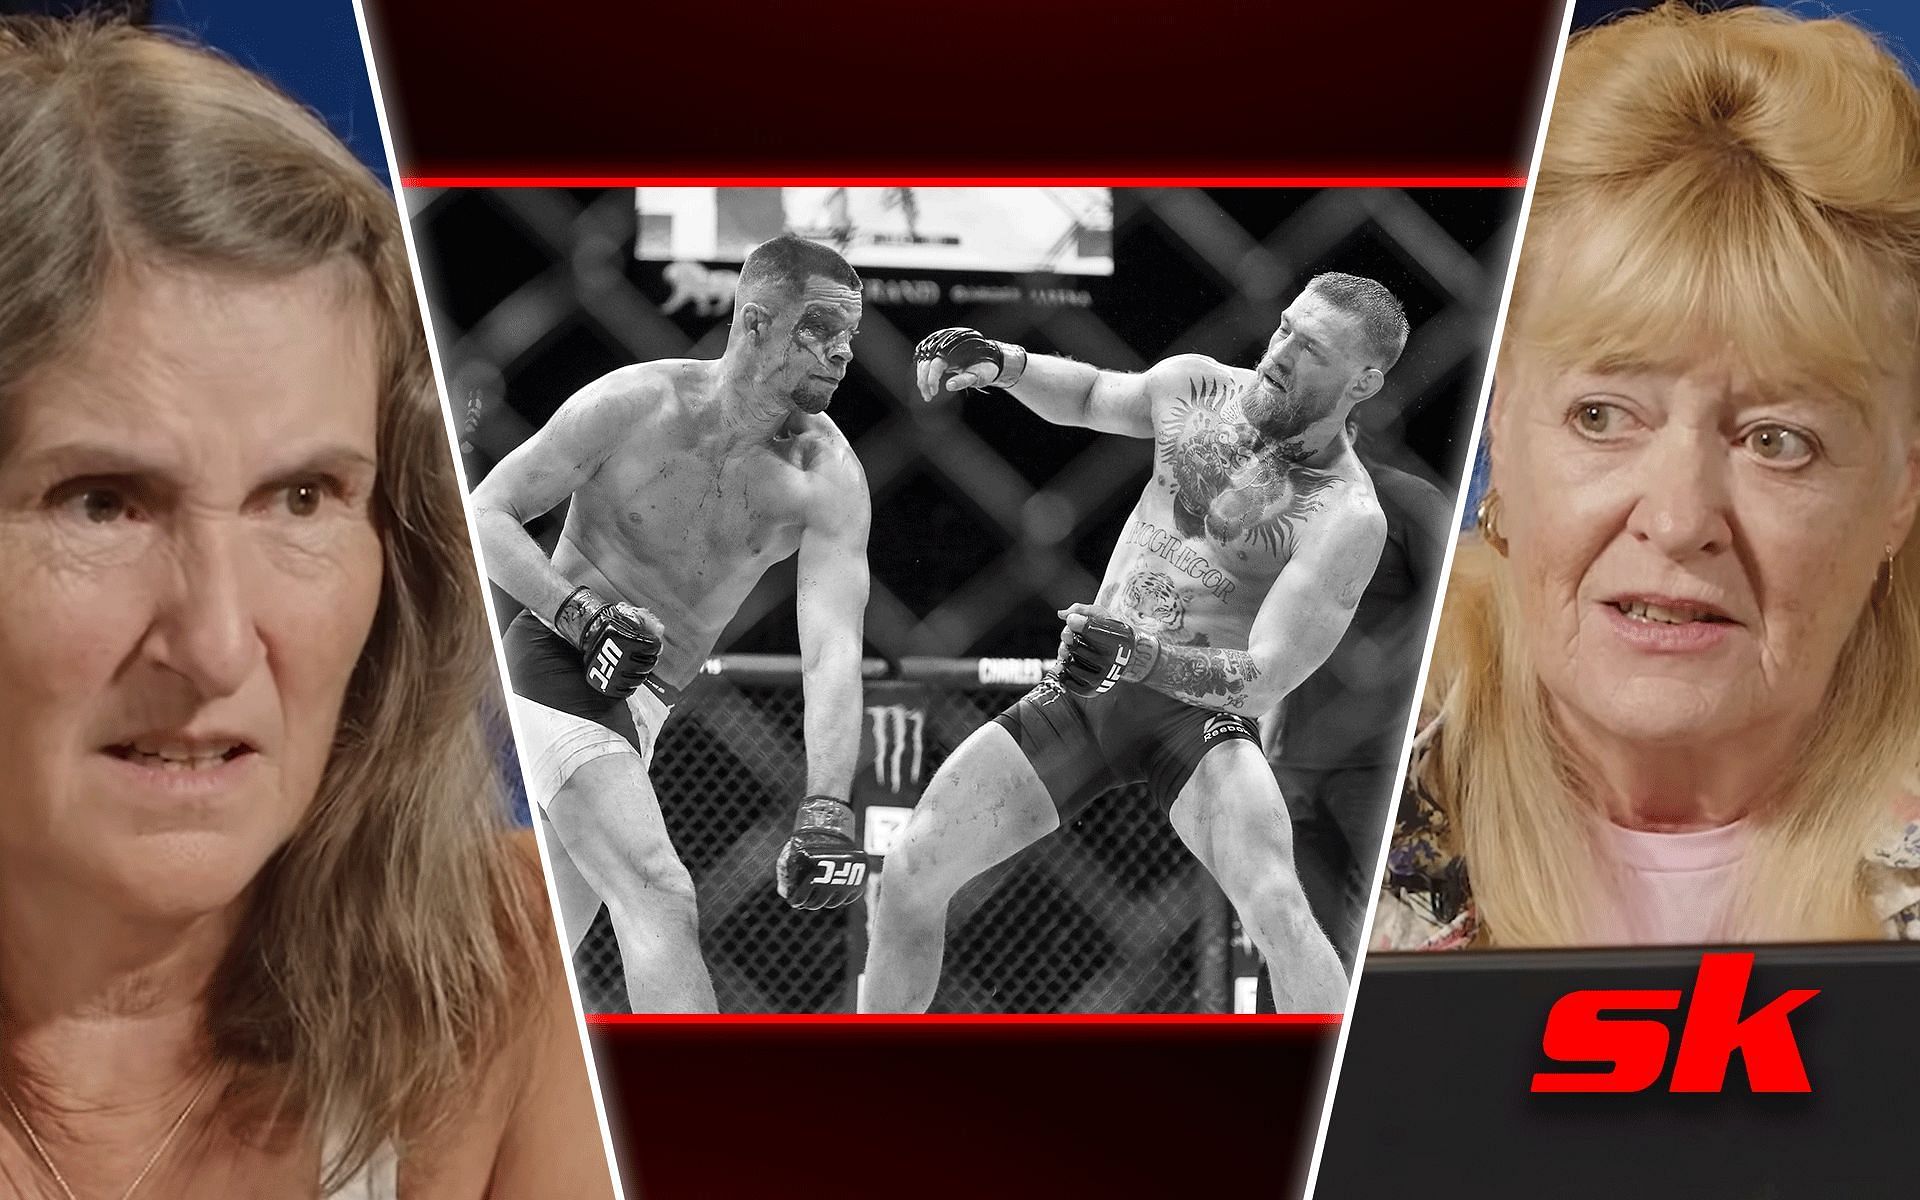 Nate Diaz &amp; Conor McGregor (centre) [Images courtesy of FightFront on YouTube]